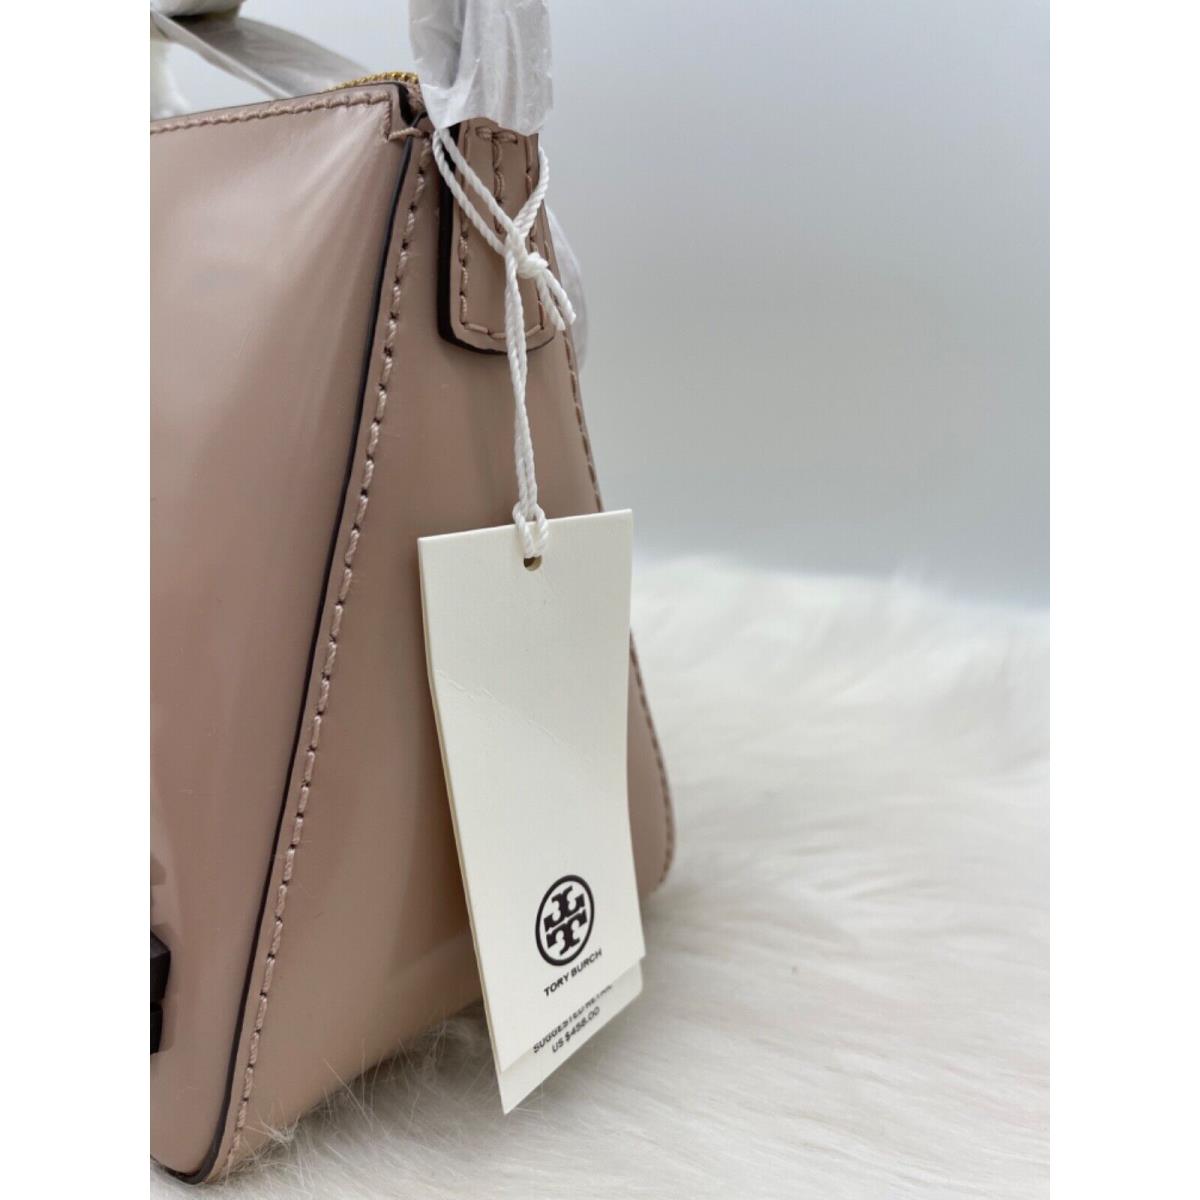 Tory Burch Mcgraw Glossy Spazzolato Leather Boxy Shoulder Bag - Tory Burch  bag - 066266745123 | Fash Brands